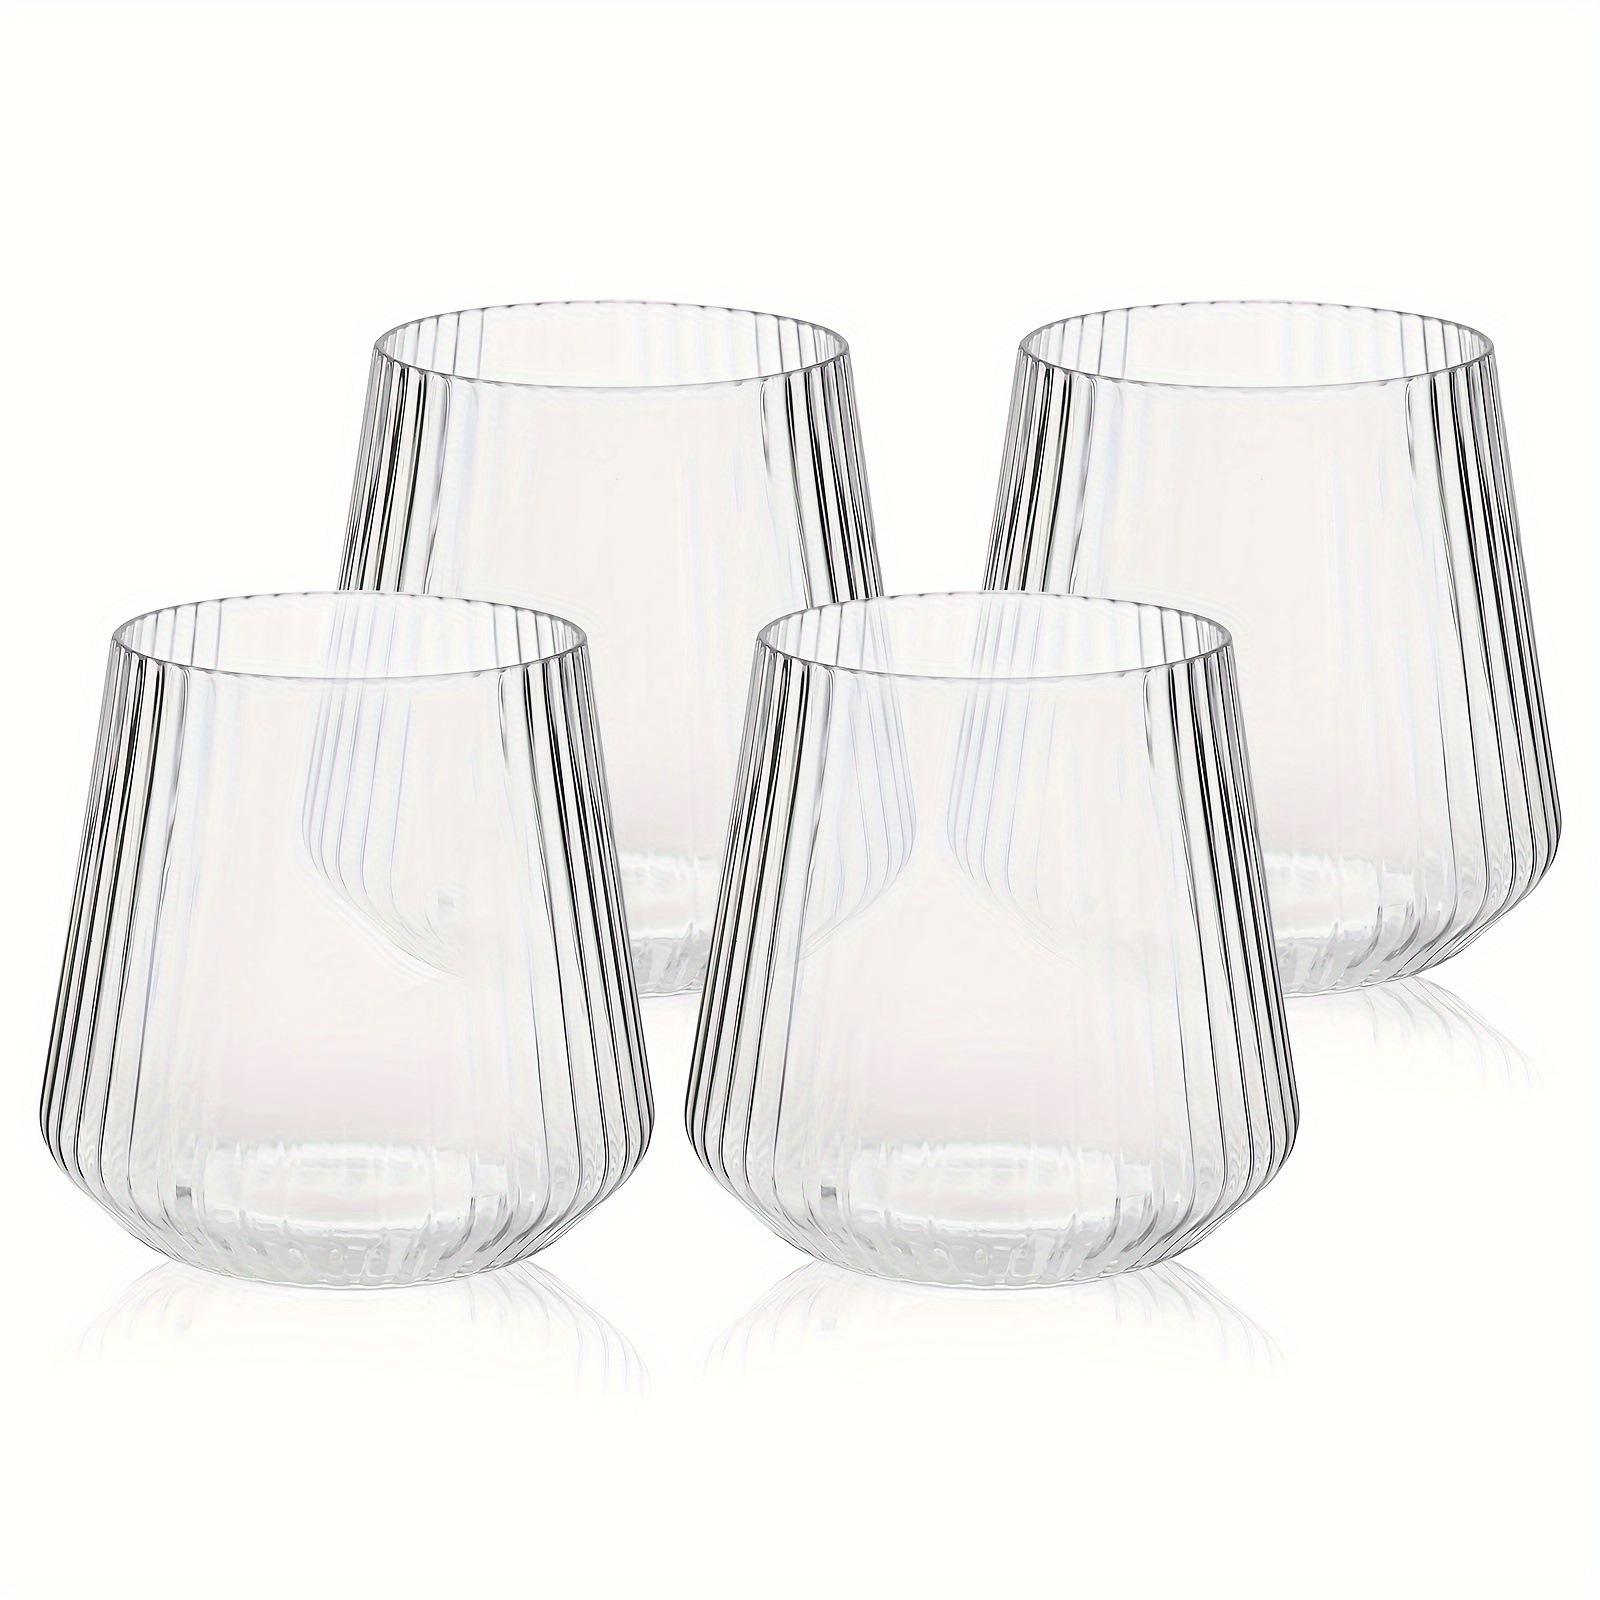 

4pcs Plastic Drinking Cups (400ml/14oz), Transparent Textured Plastic Cups, Sturdy And Reusable, Suitable For Drinks, Desserts, And More